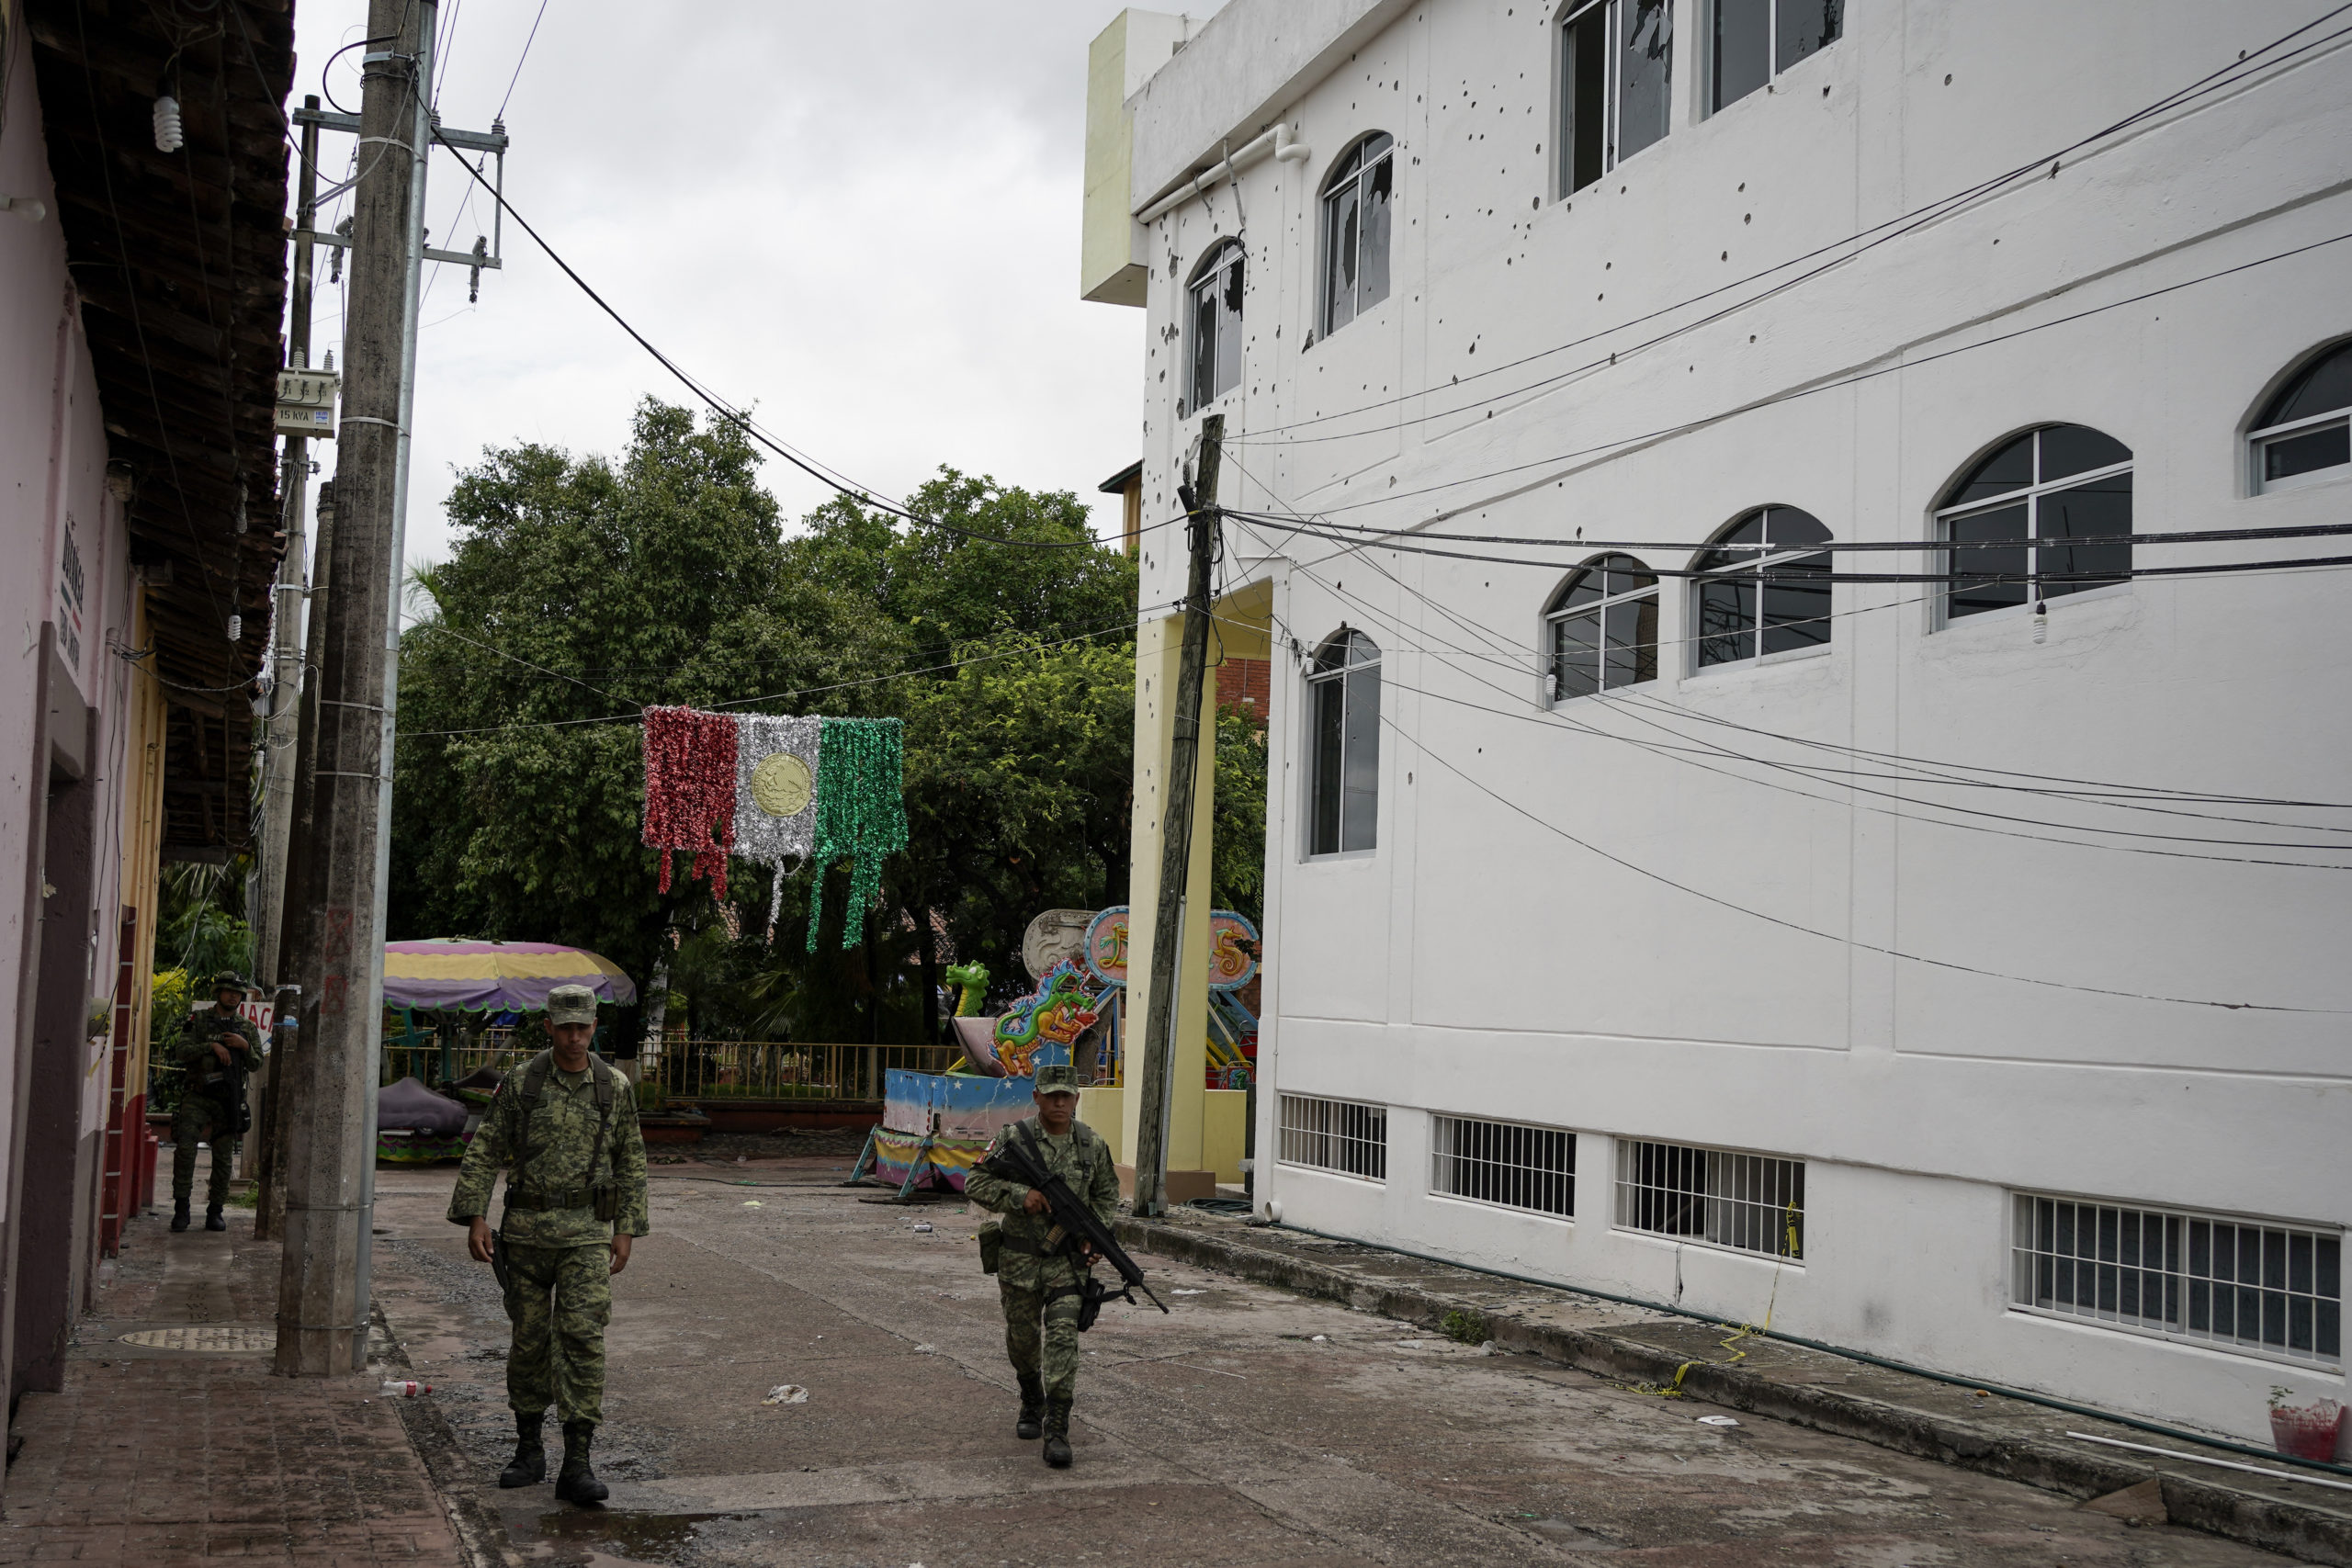 Soldiers walk past City Hall in San Miguel Totolapan, Mexico, which is riddled with bullet holes after 20 people were killed in an attack on Wednesday.